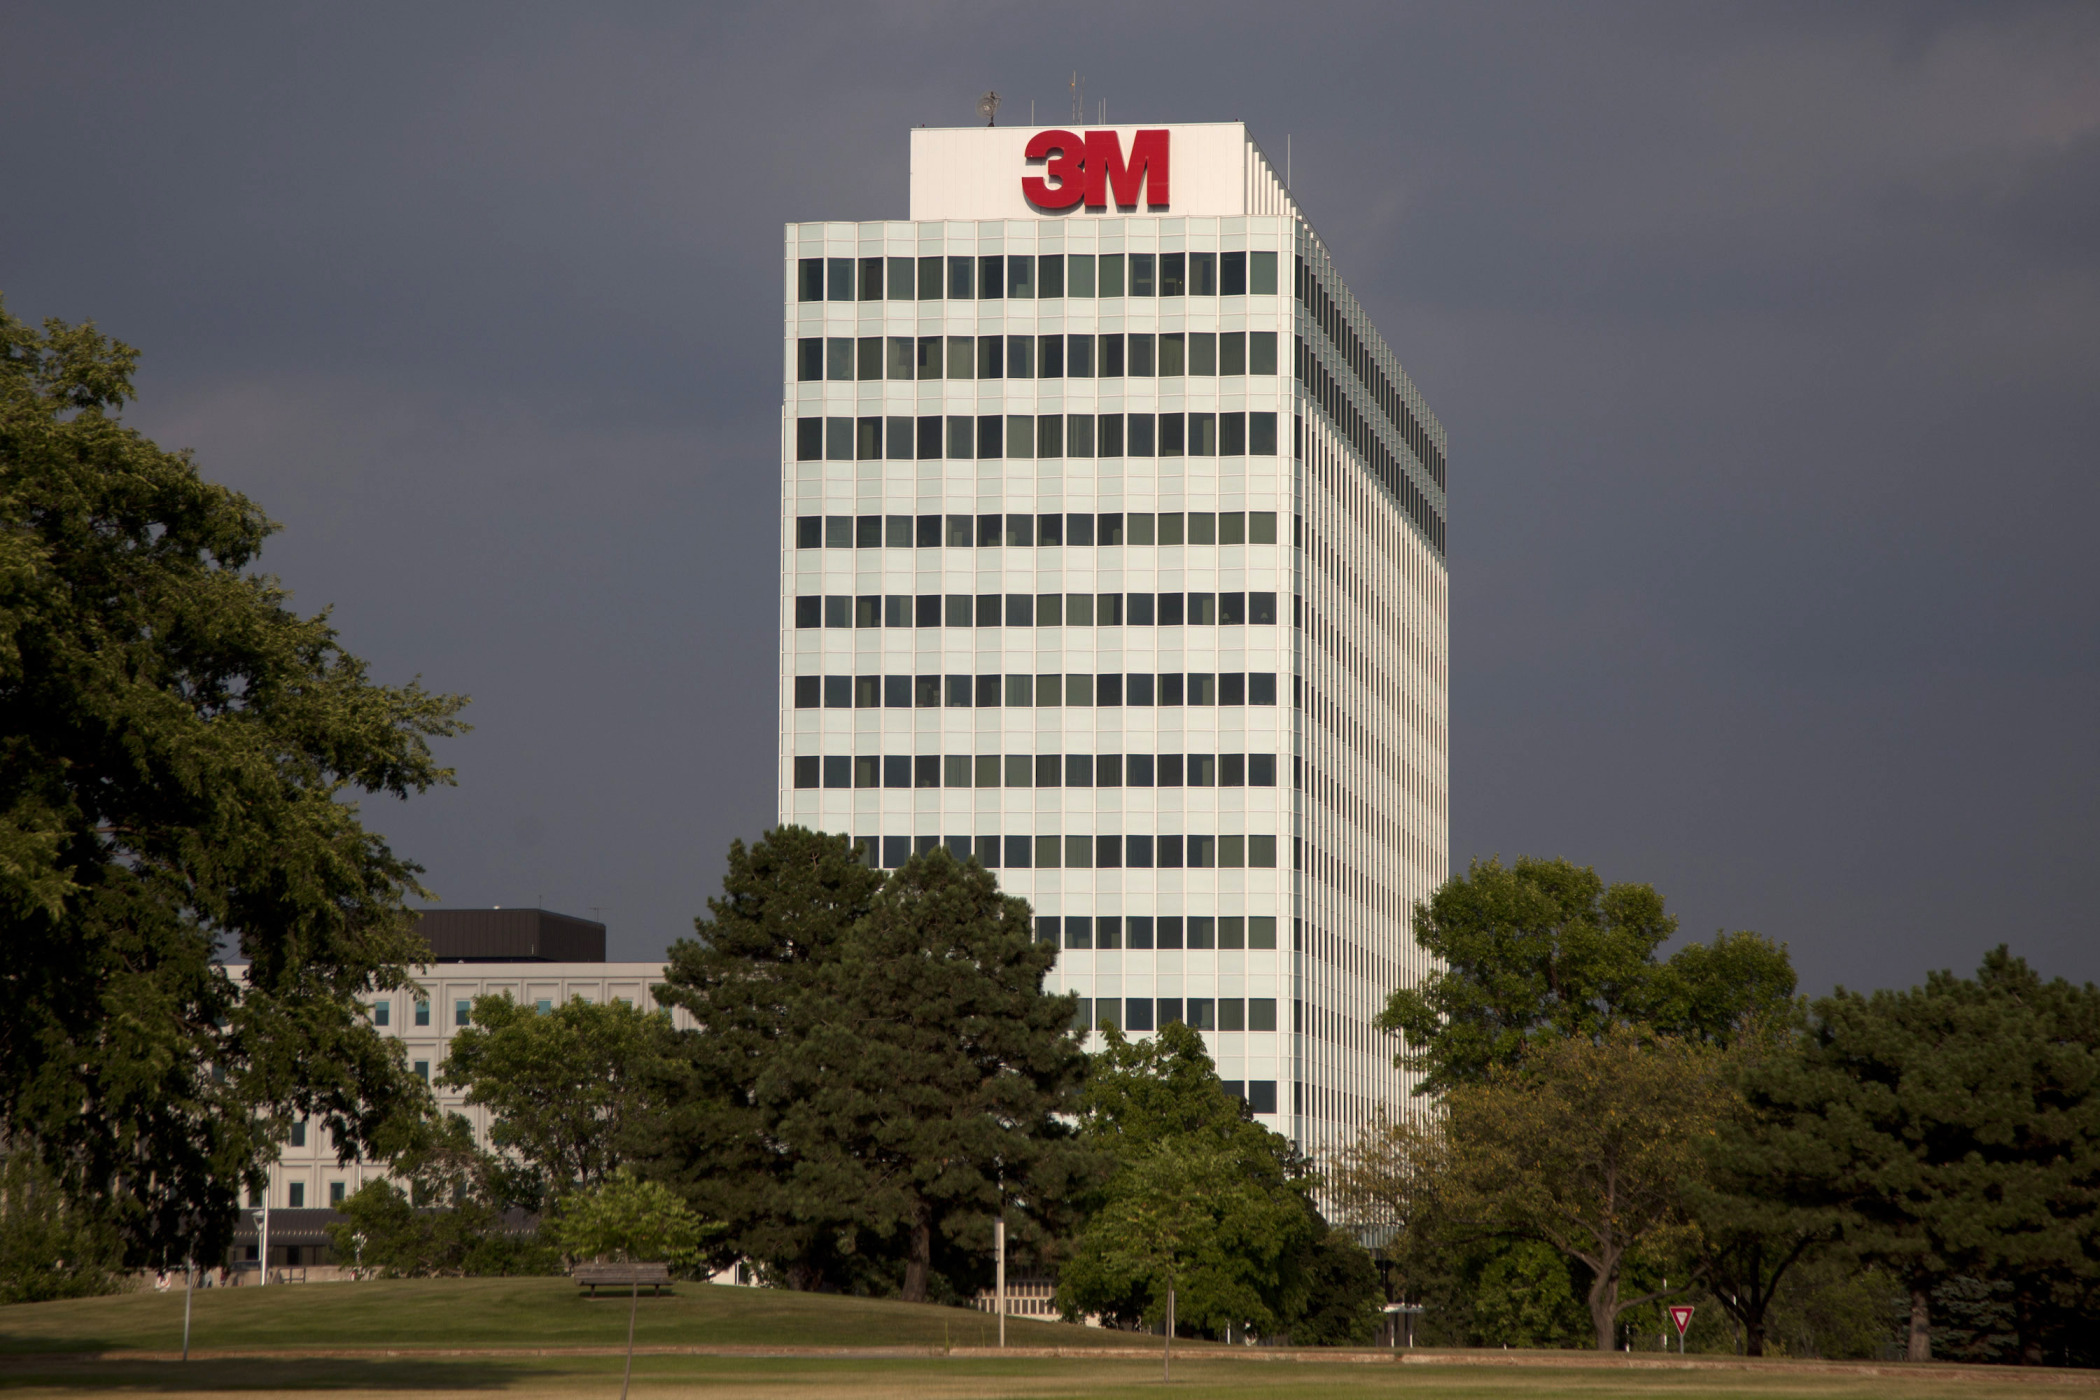 3M will cut jobs as part of a cost-savings plan: report